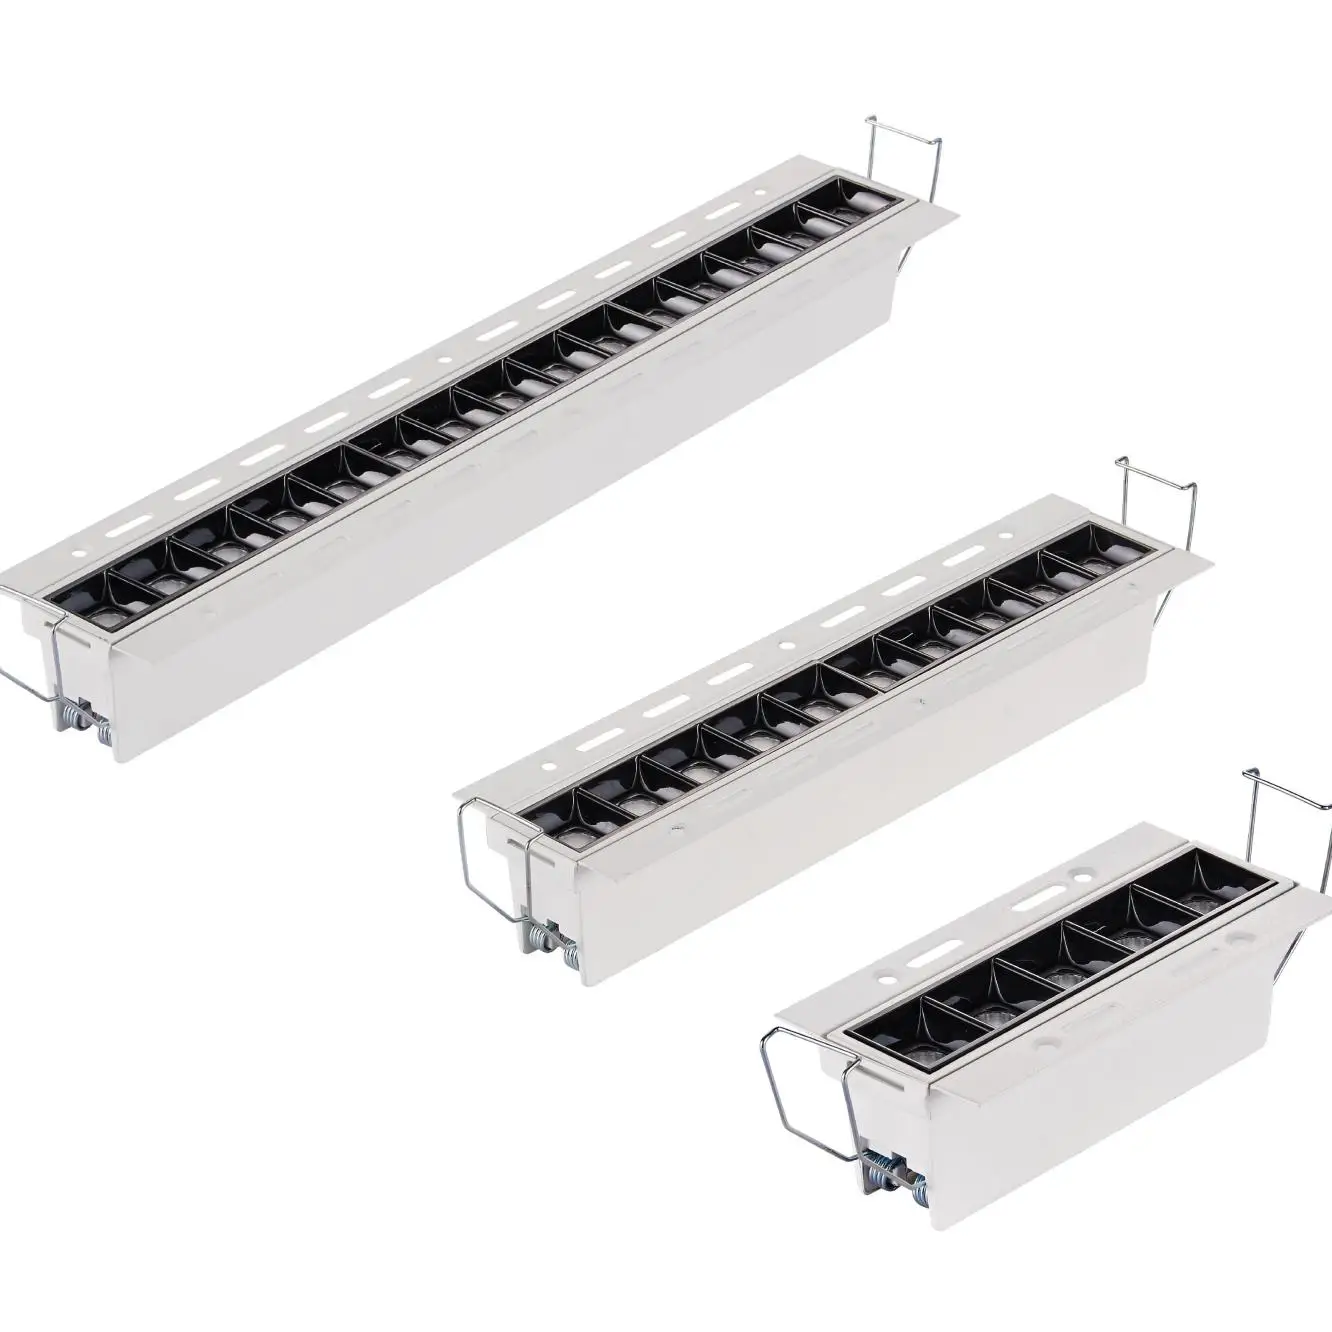 Trimless stainless steel linear light recessed square spot